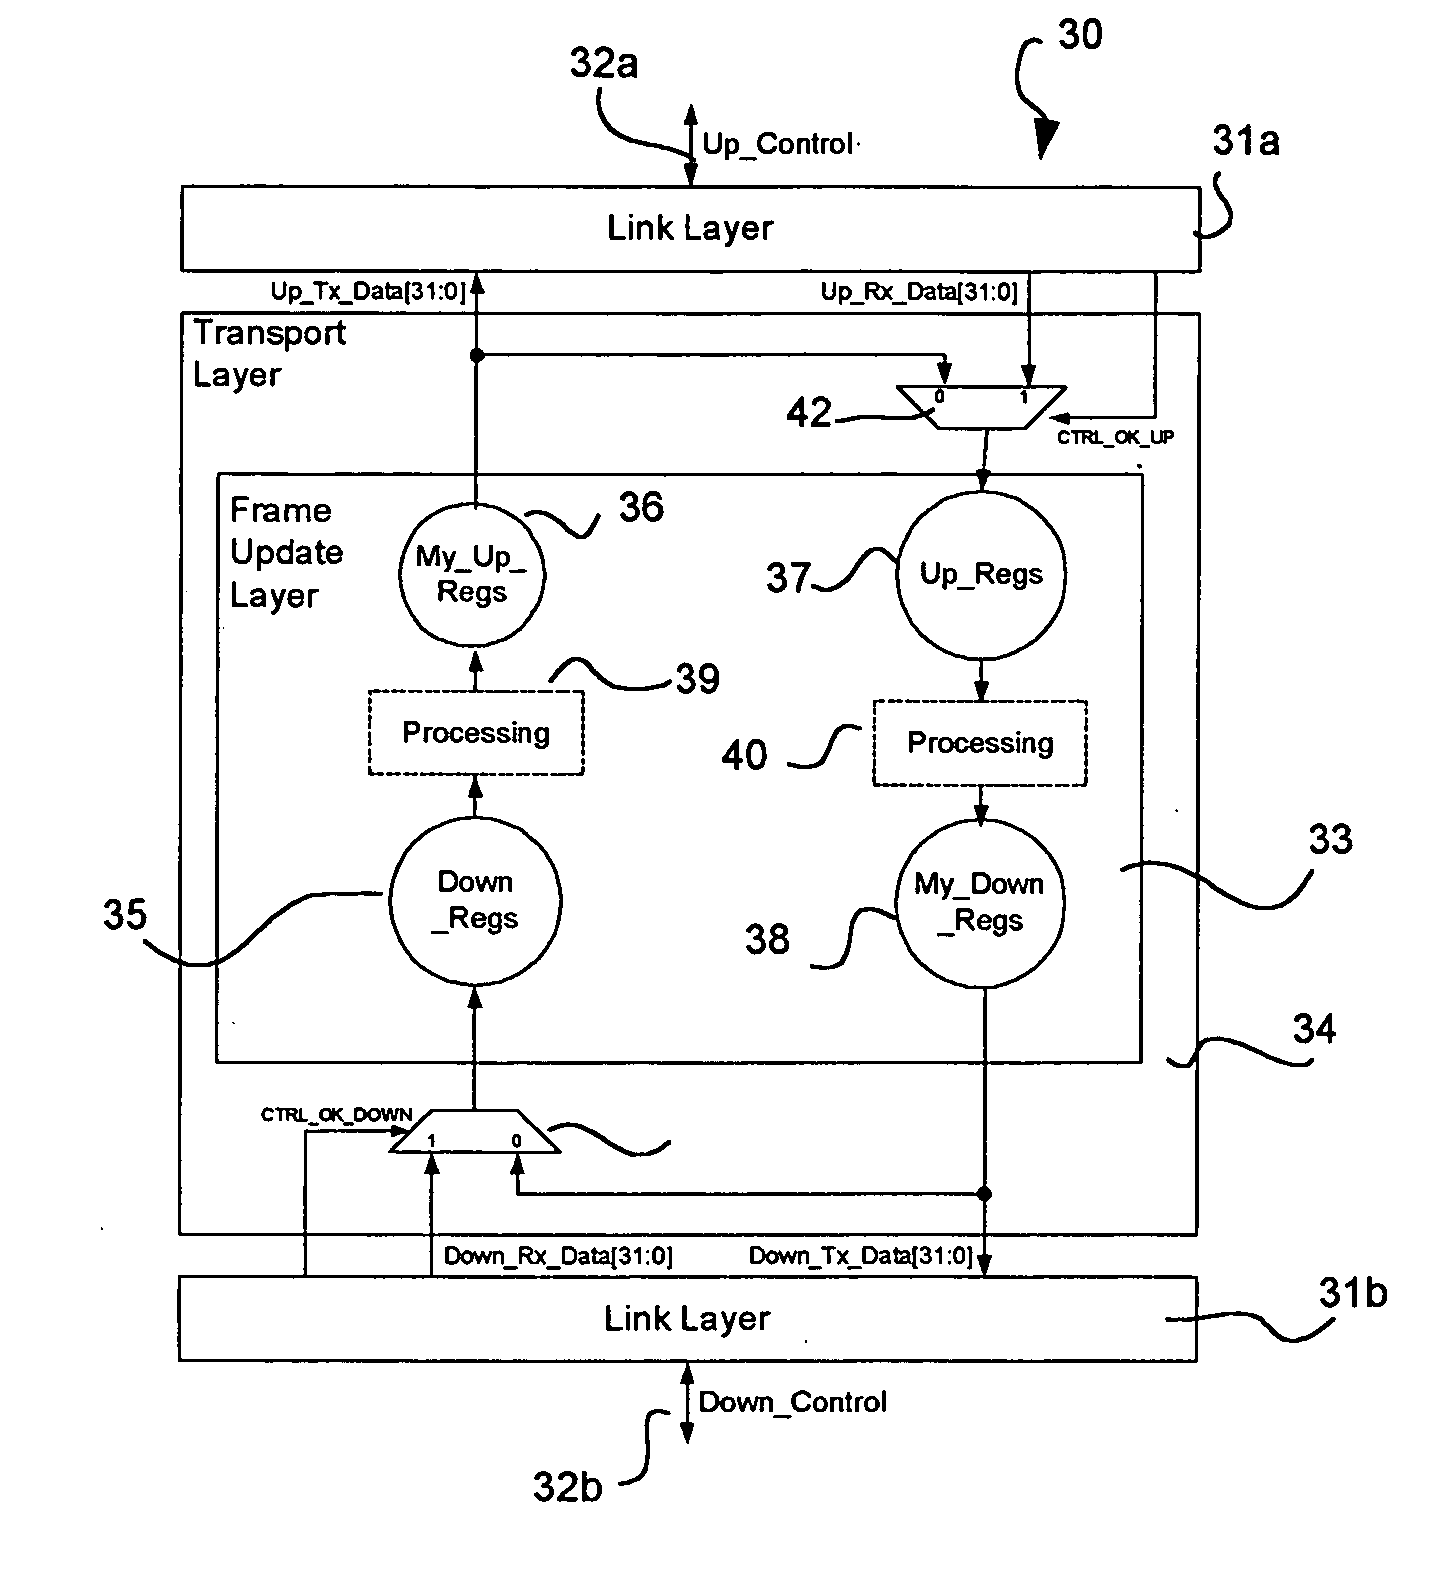 Cascade control system for network units